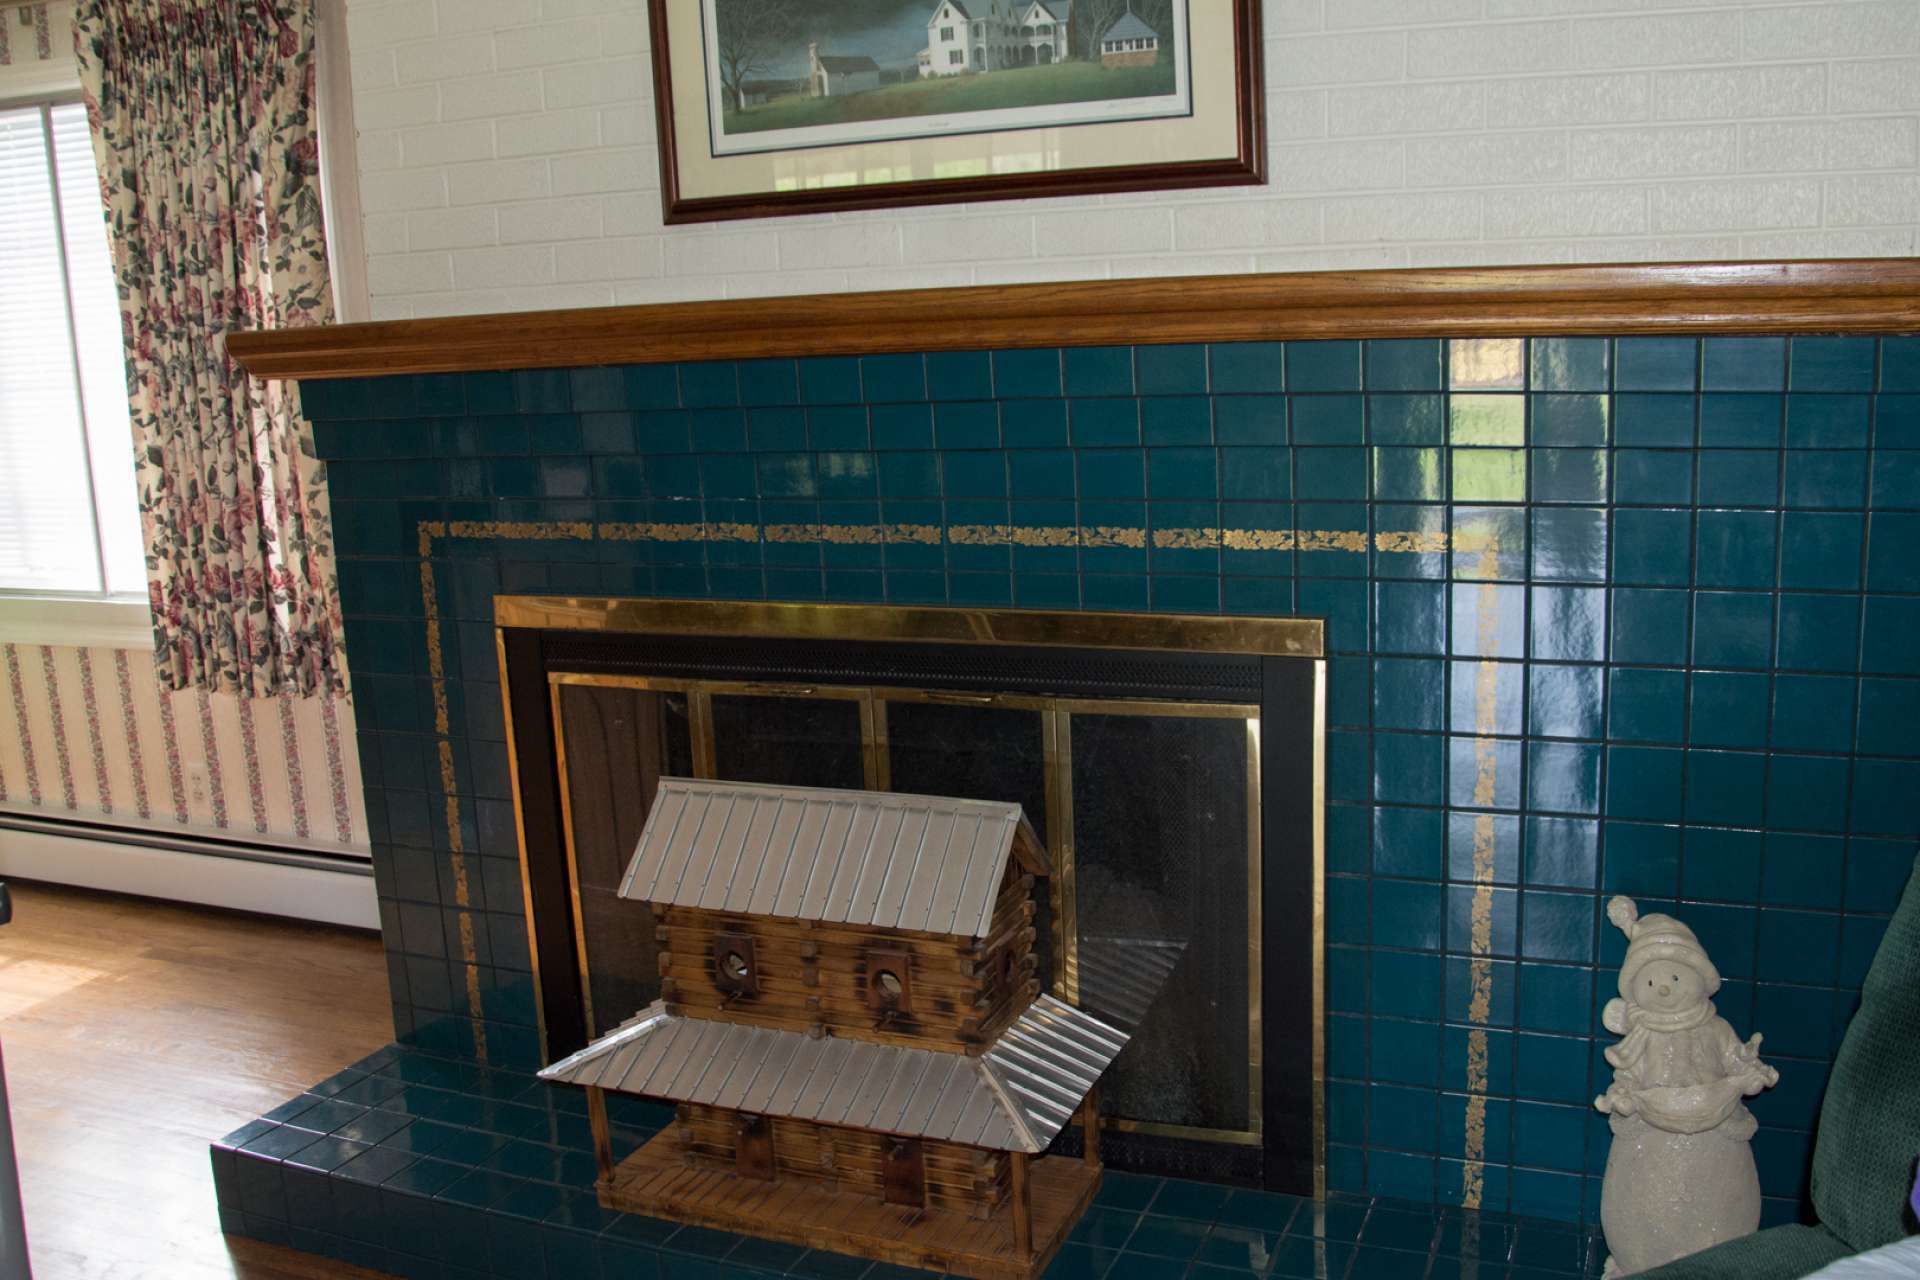 The fireplace has gas logs (no tank) installed but can easily be returned to wood burning.